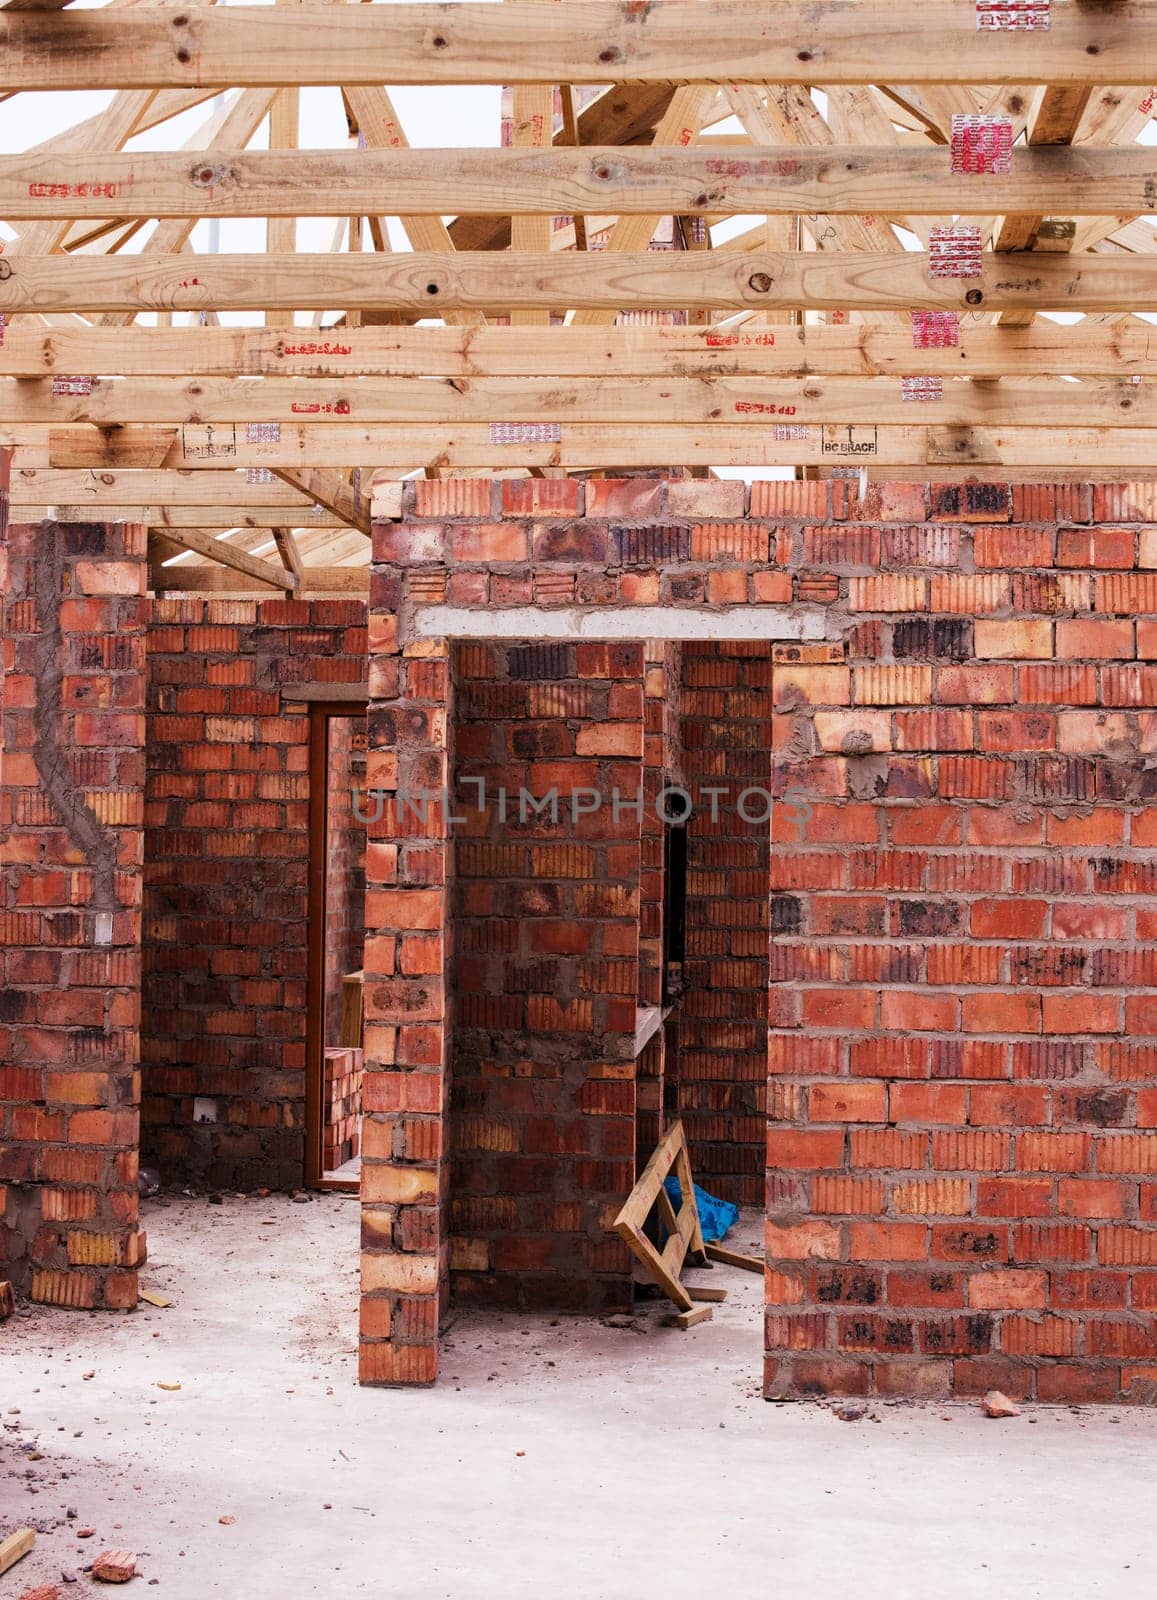 Property, brick wall and new real estate project for construction, development and dream home frame. House, building and architecture with structure, worksite and suburban improvement and design.